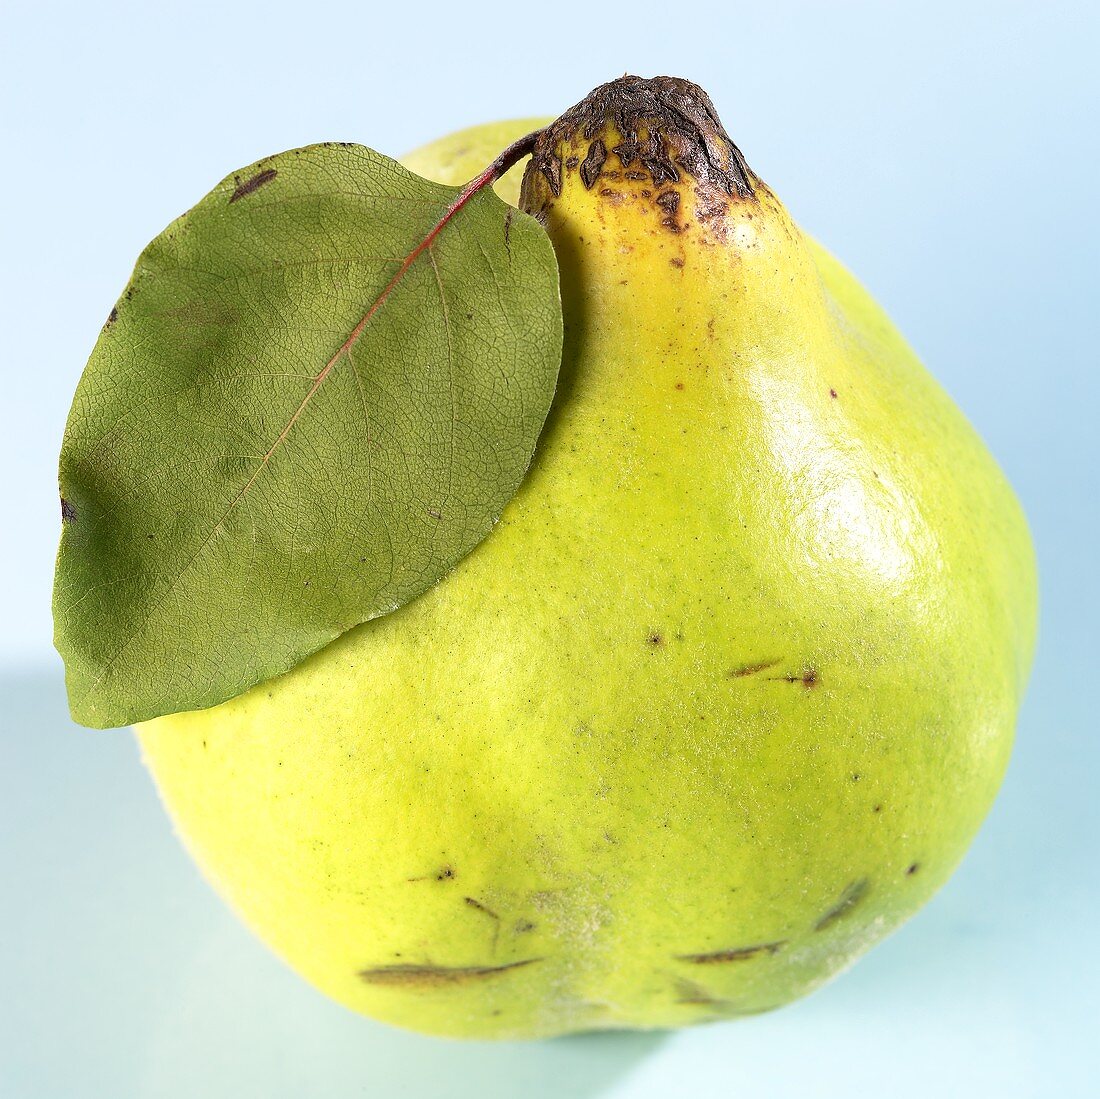 A quince with leaf